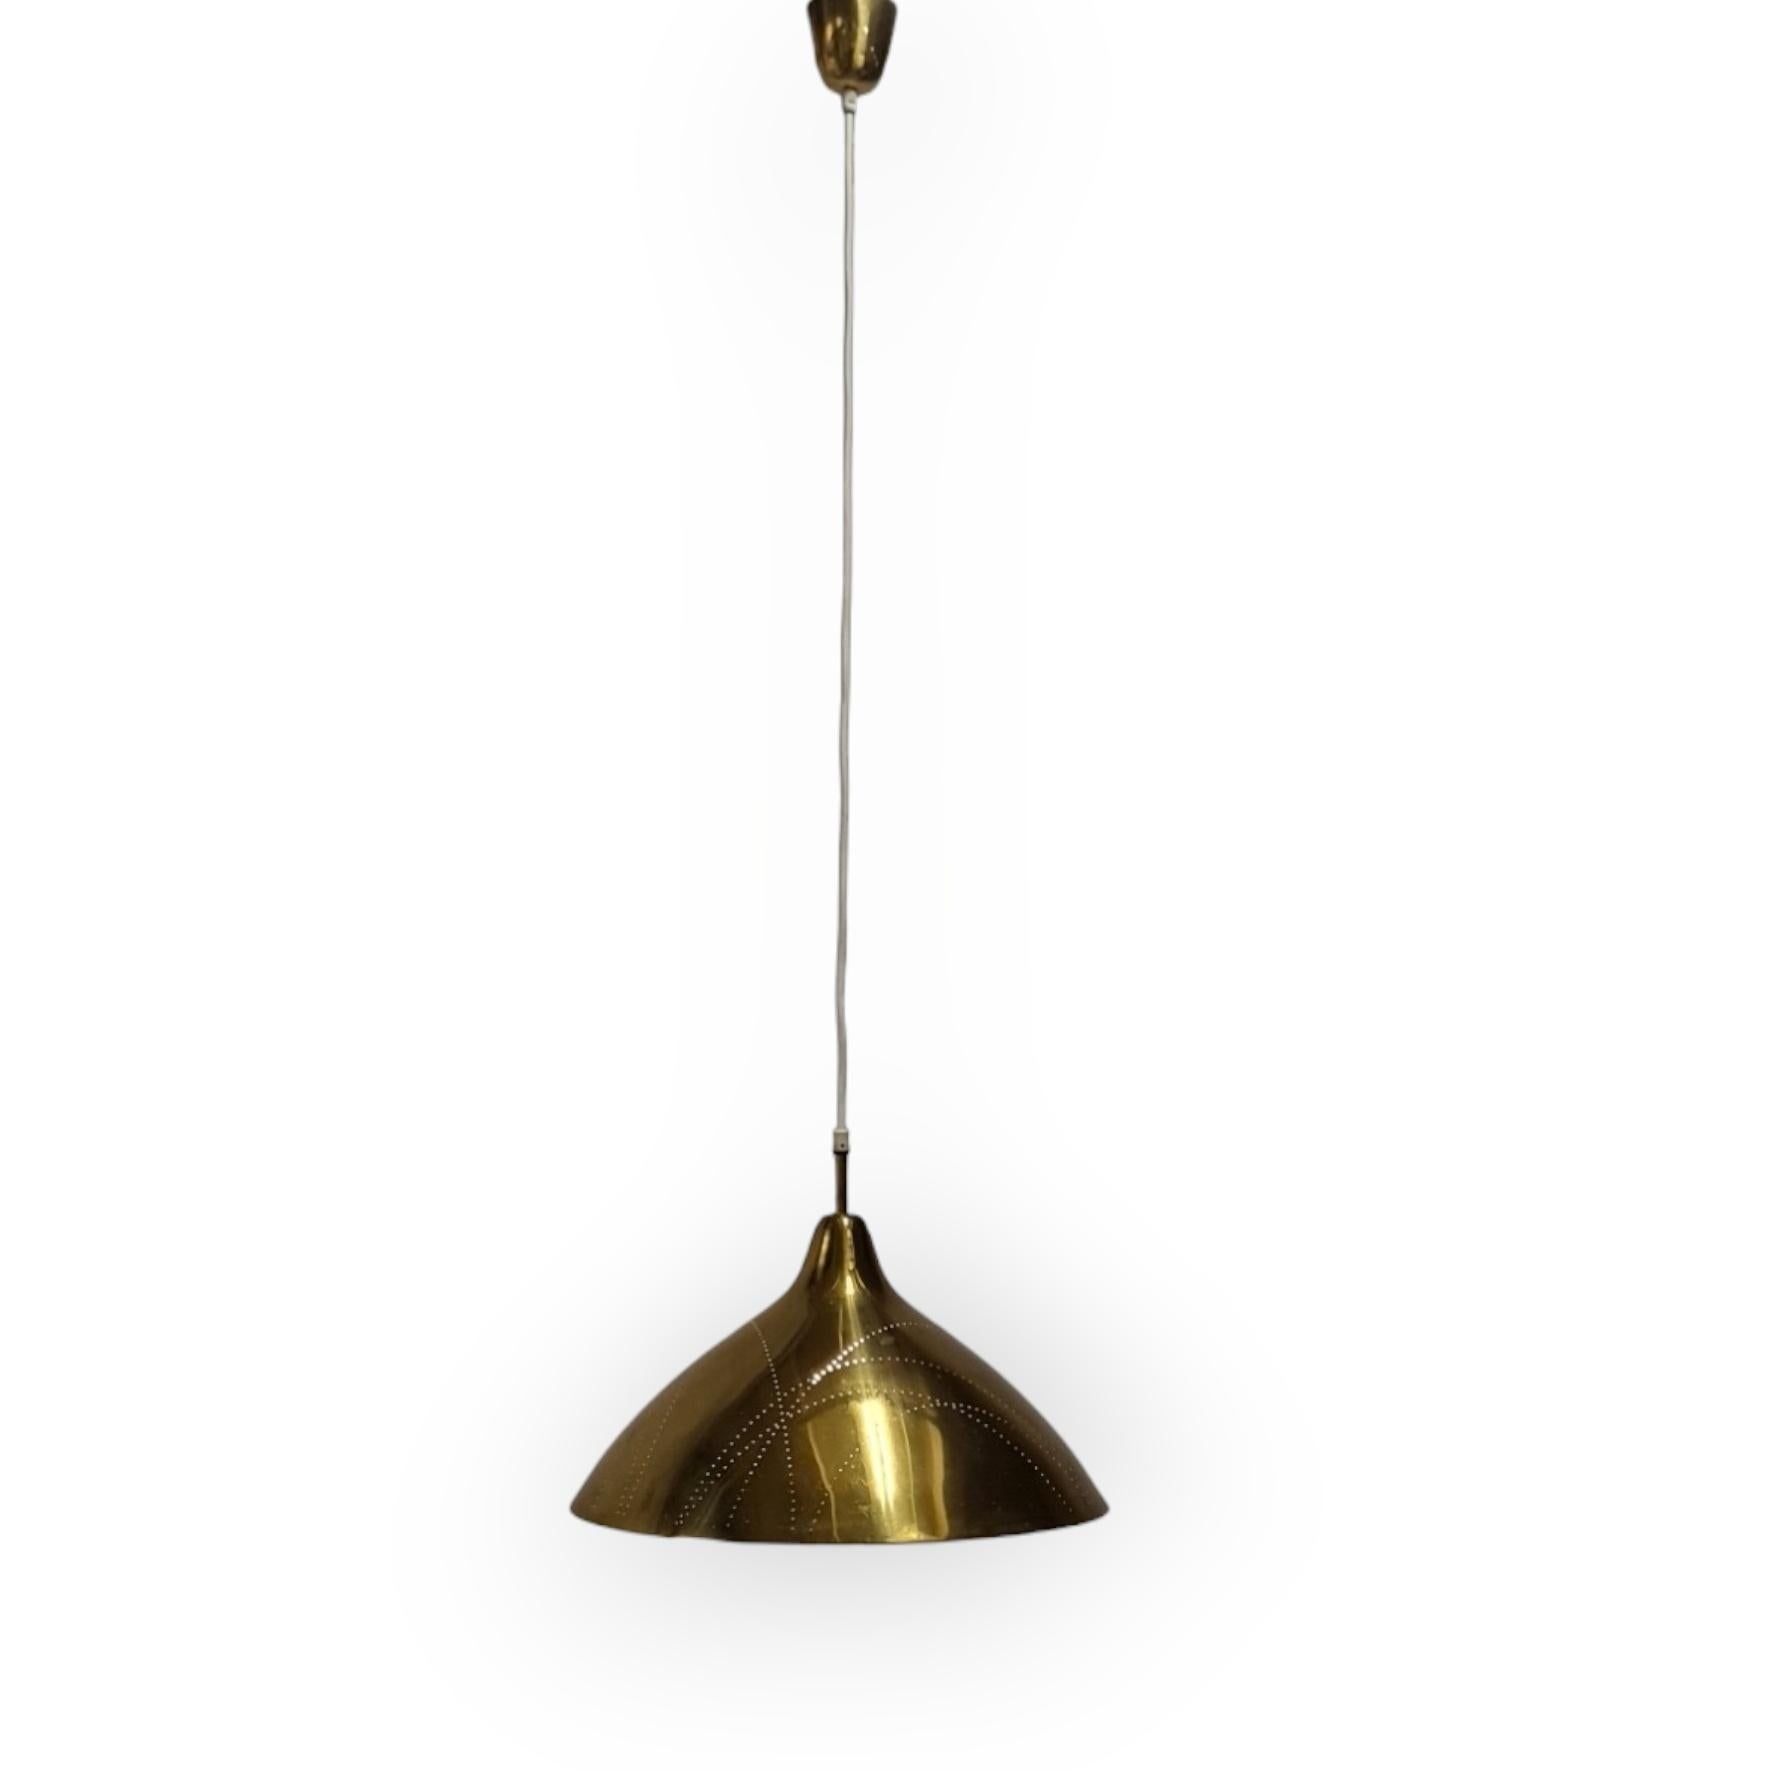 Finnish Lisa Johansson-Papé Brass Ceiling Pendant with Line Perforation, Orno 1950s For Sale